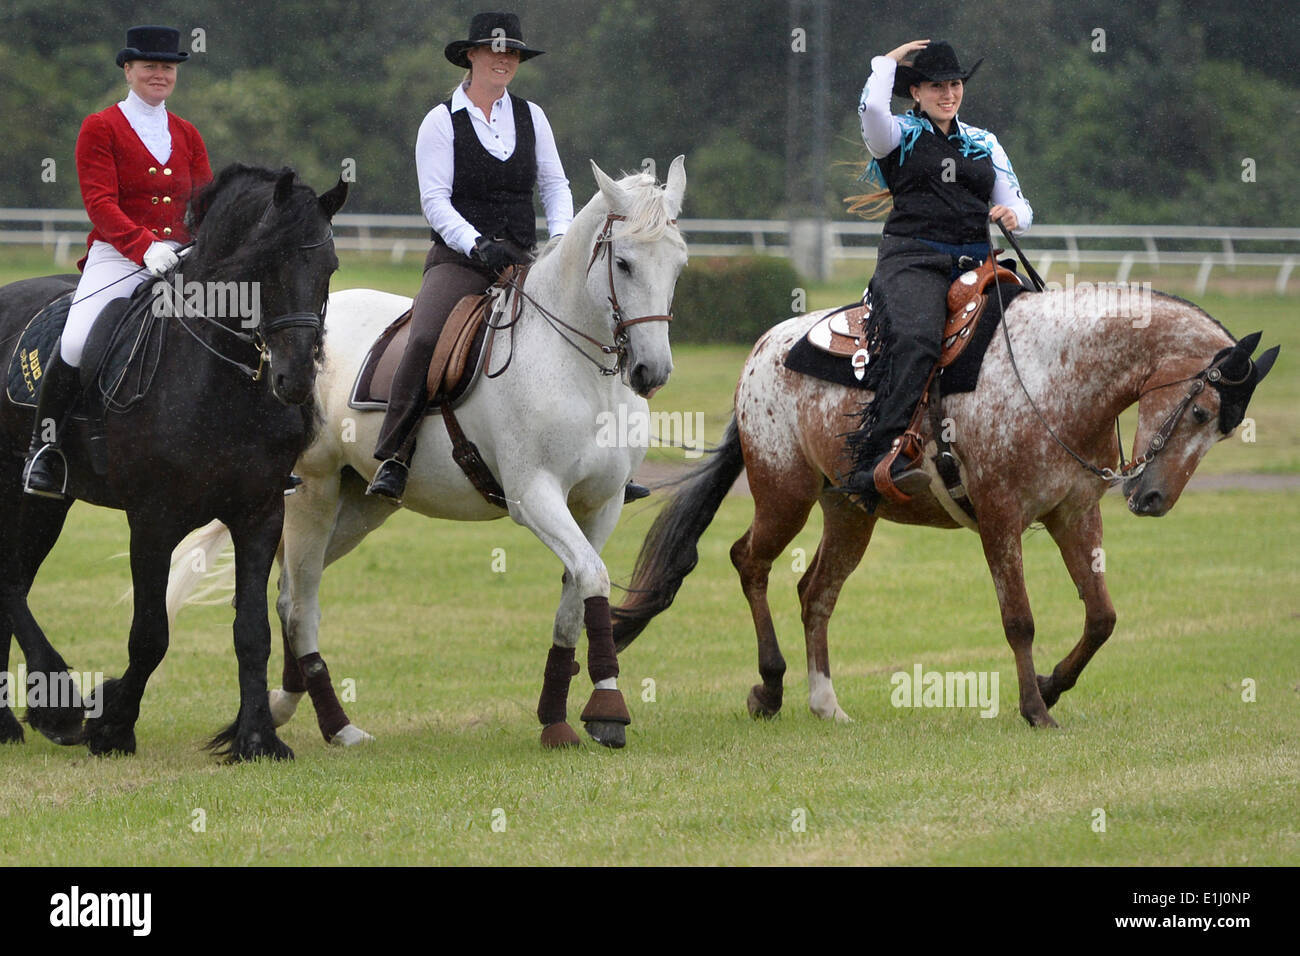 Frisian stallion Ebe with rider Susanne Fischer-Froehlich (L-R), Andalusia gray horse Luna with rider Petra Tinedo Moreno and American Appaloosa stud RR Moonlight Casey with rider Yara Deeb ride during a photocall for Equitana Open Air at the Galopprennbahn in Neuss, Germany, 05 June 2014. The equestrian festival 'Equitana Open Air 2014' with almost 200 events and 50 breeds of horse takes place from 13 until 15 June 2014. Photo: MATTHIAS BALK/dpa Stock Photo